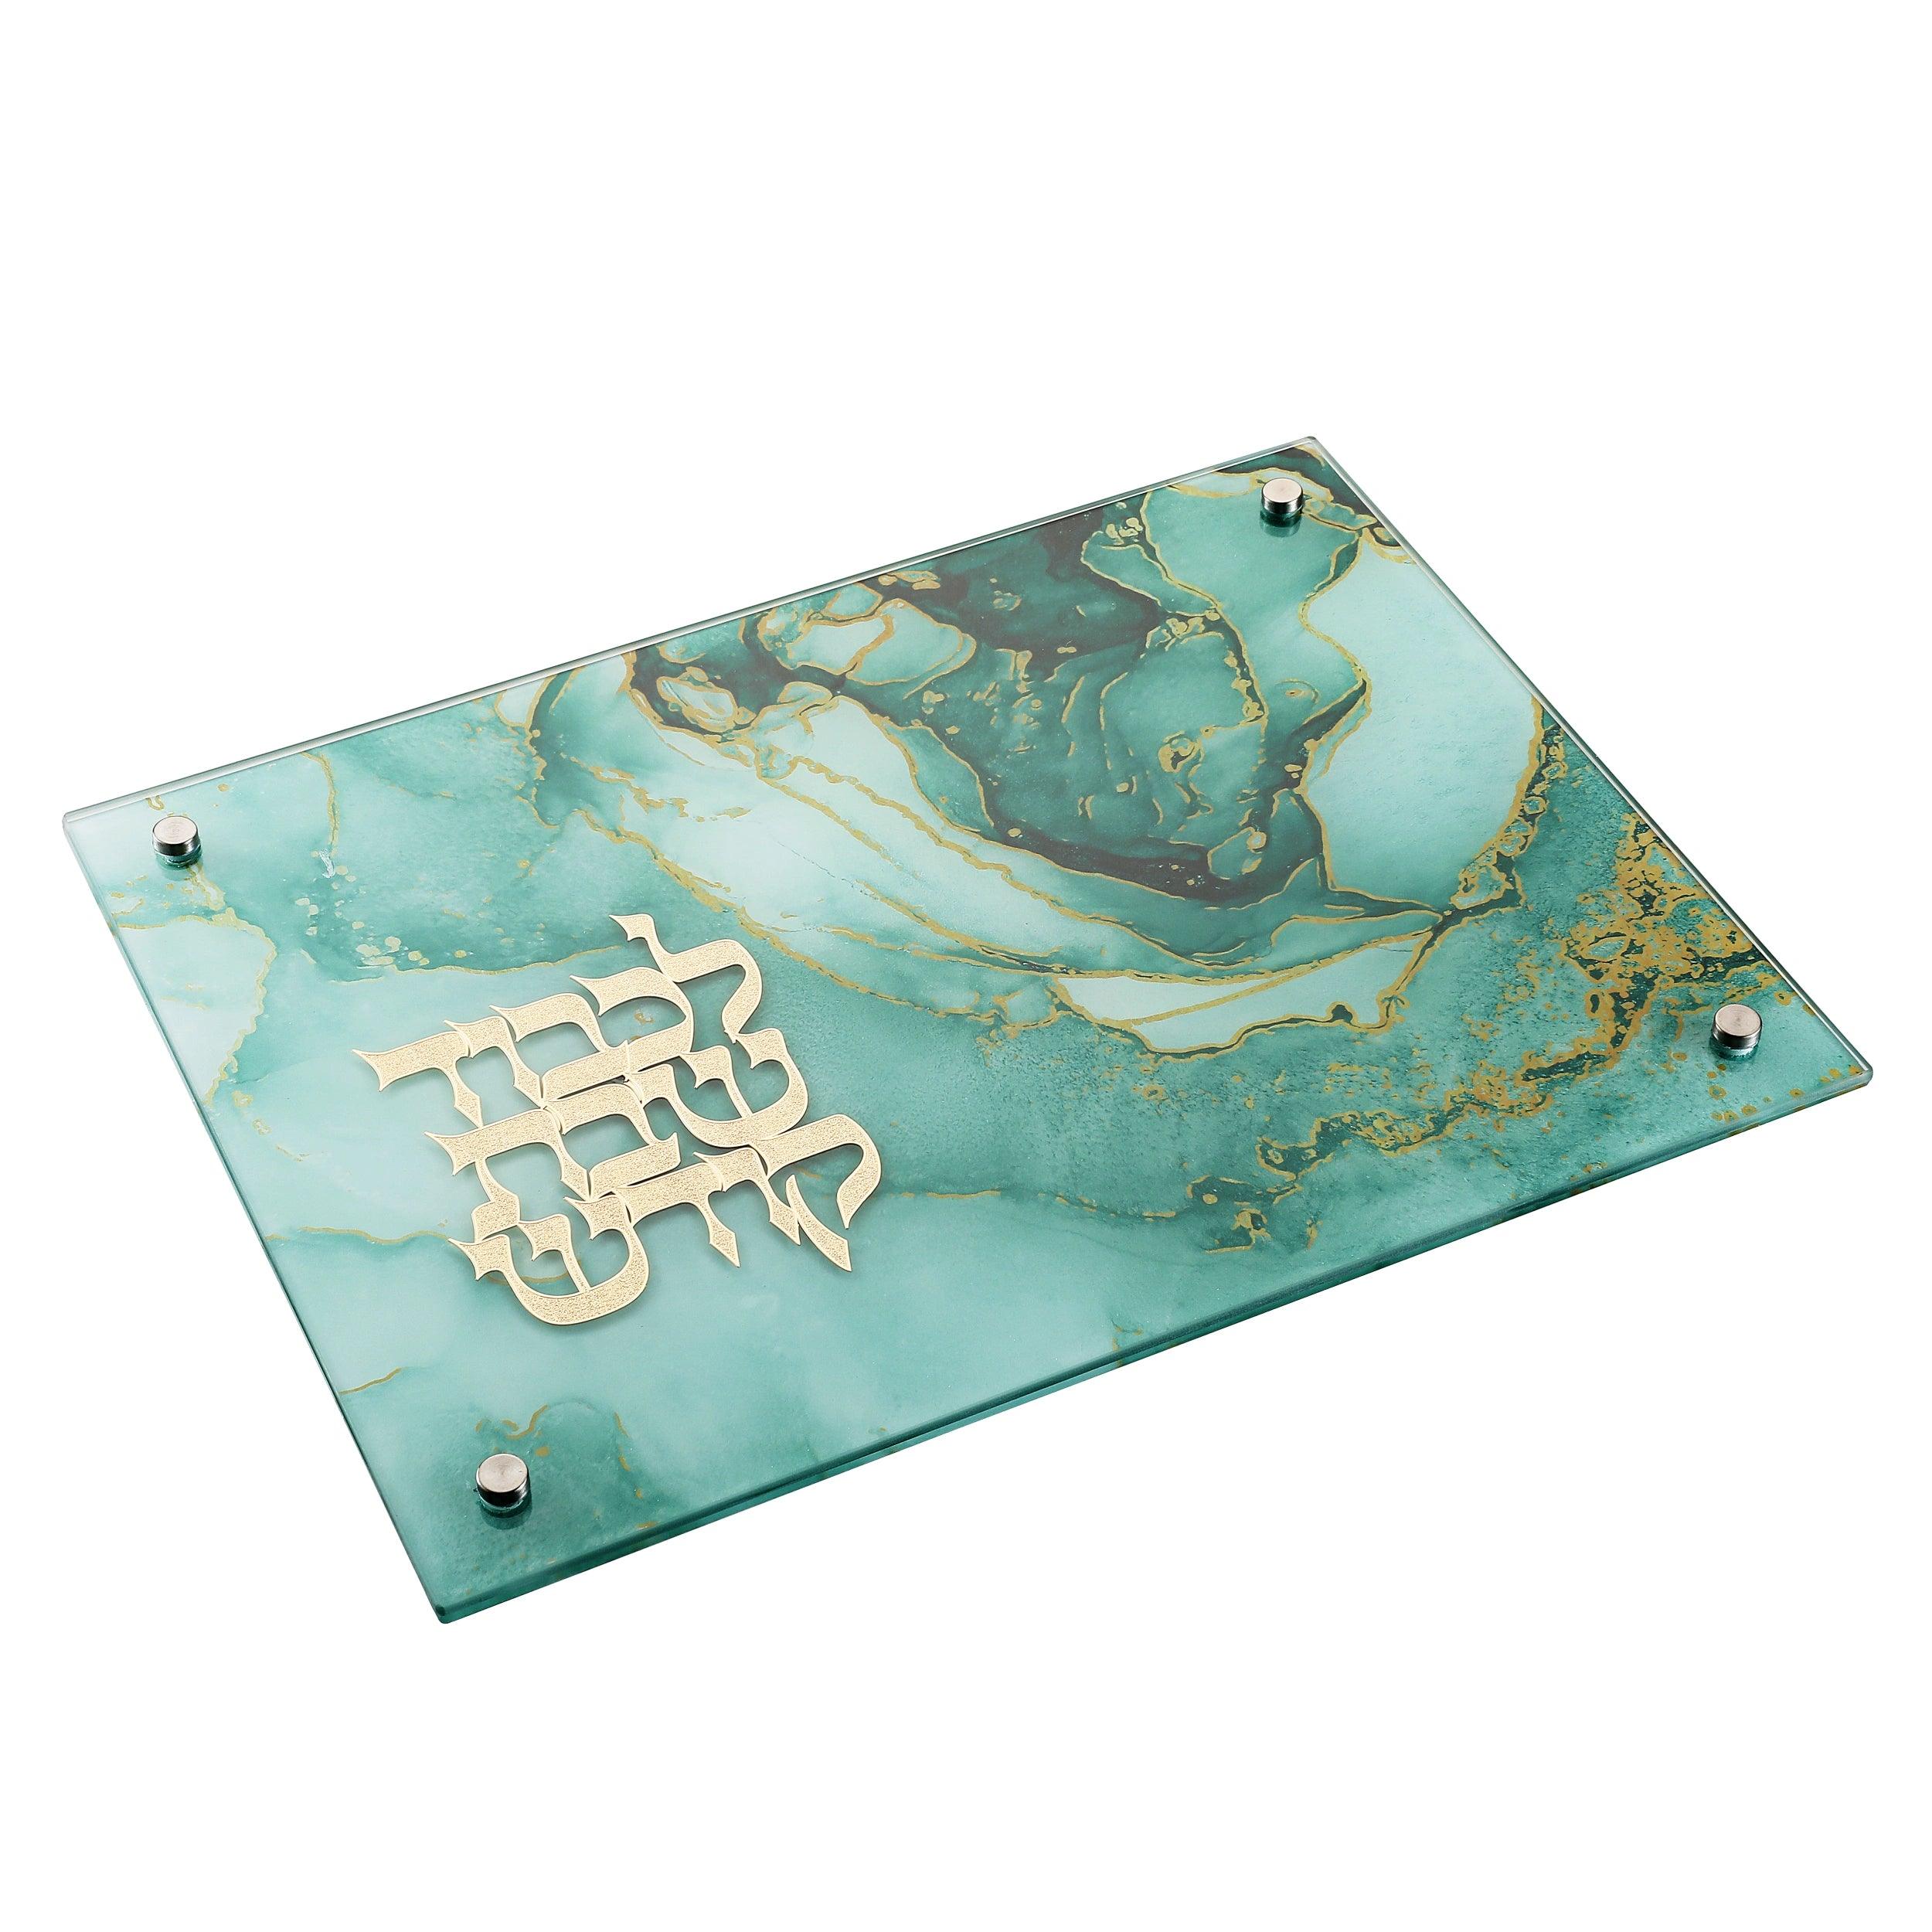 Teal Marble Challah Board With Gold Metal Plate - Elegant Linen